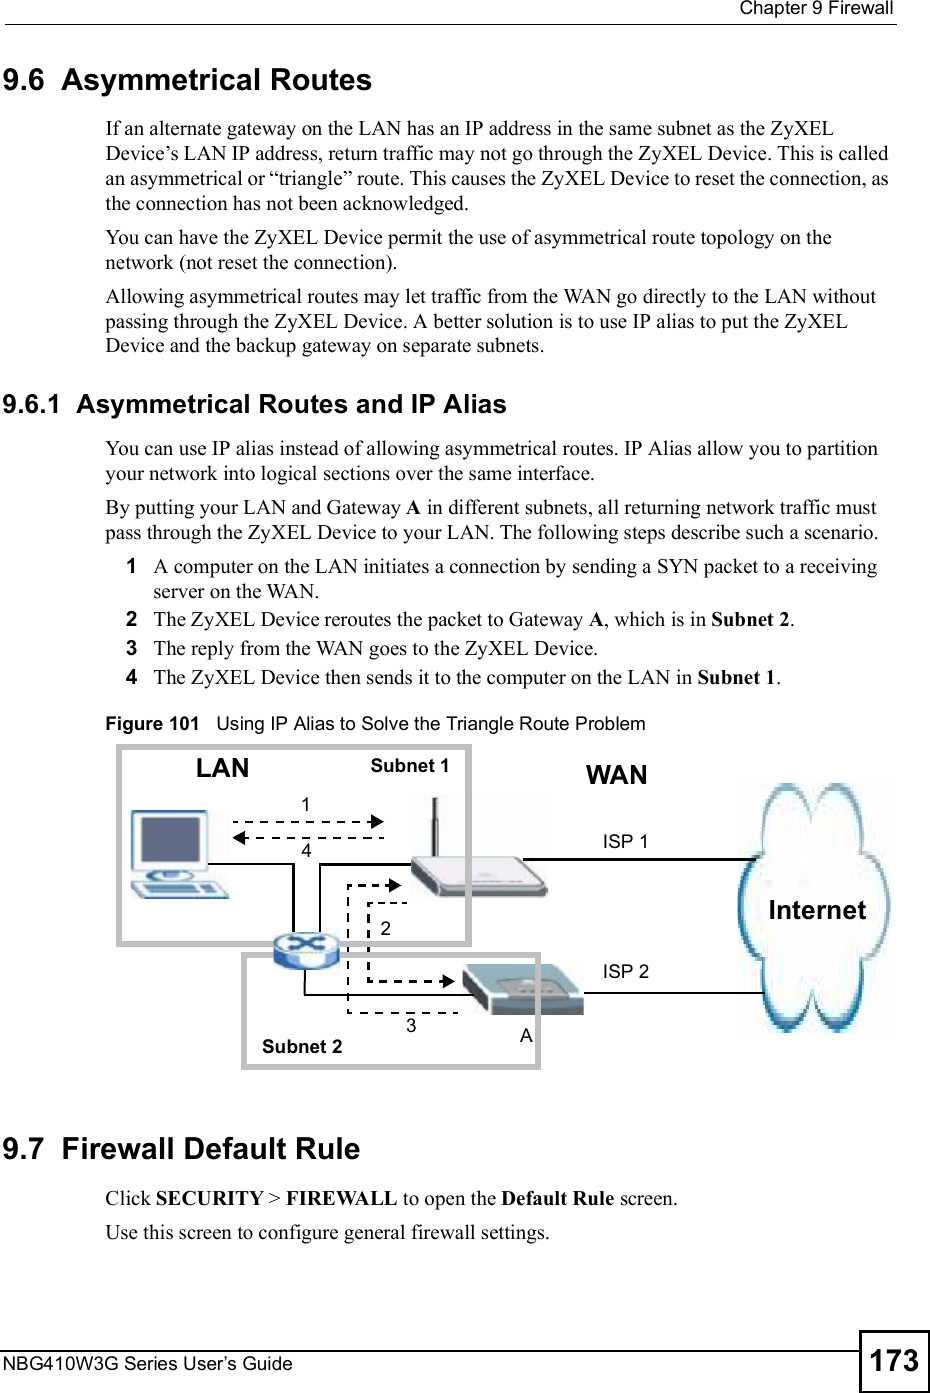  Chapter 9FirewallNBG410W3G Series User s Guide 1739.6  Asymmetrical RoutesIf an alternate gateway on the LAN has an IP address in the same subnet as the ZyXEL Device!s LAN IP address, return traffic may not go through the ZyXEL Device. This is called an asymmetrical or &quot;triangle# route. This causes the ZyXEL Device to reset the connection, as the connection has not been acknowledged.You can have the ZyXEL Device permit the use of asymmetrical route topology on the network (not reset the connection).Allowing asymmetrical routes may let traffic from the WAN go directly to the LAN without passing through the ZyXEL Device. A better solution is to use IP alias to put the ZyXEL Device and the backup gateway on separate subnets.9.6.1  Asymmetrical Routes and IP AliasYou can use IP alias instead of allowing asymmetrical routes. IP Alias allow you to partition your network into logical sections over the same interface. By putting your LAN and Gateway A in different subnets, all returning network traffic must pass through the ZyXEL Device to your LAN. The following steps describe such a scenario.1A computer on the LAN initiates a connection by sending a SYN packet to a receiving server on the WAN.2The ZyXEL Device reroutes the packet to Gateway A, which is in Subnet 2. 3The reply from the WAN goes to the ZyXEL Device. 4The ZyXEL Device then sends it to the computer on the LAN in Subnet 1.  Figure 101   Using IP Alias to Solve the Triangle Route Problem9.7  Firewall Default Rule Click SECURITY &gt; FIREWALL to open the Default Rule screen. Use this screen to configure general firewall settings.12Internet3LANAISP 1ISP 24WANSubnet 1Subnet 2